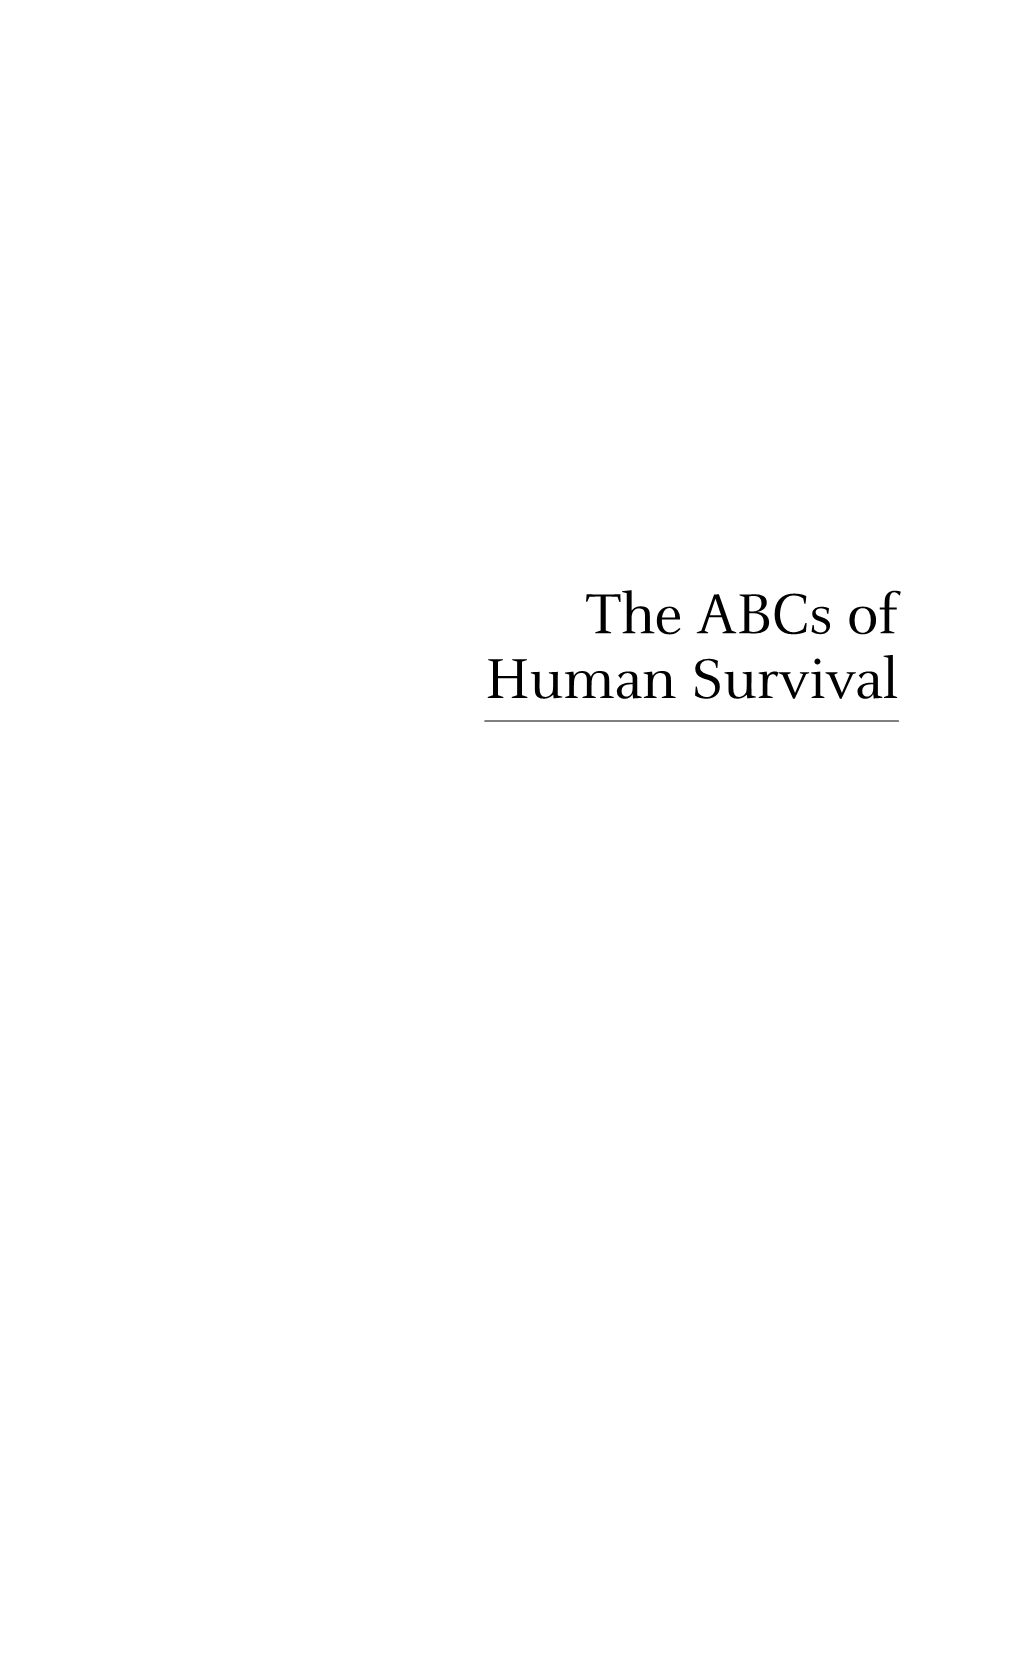 The Abcs of Human Survival: a Paradigm for Global Citizenship by Arthur Clark